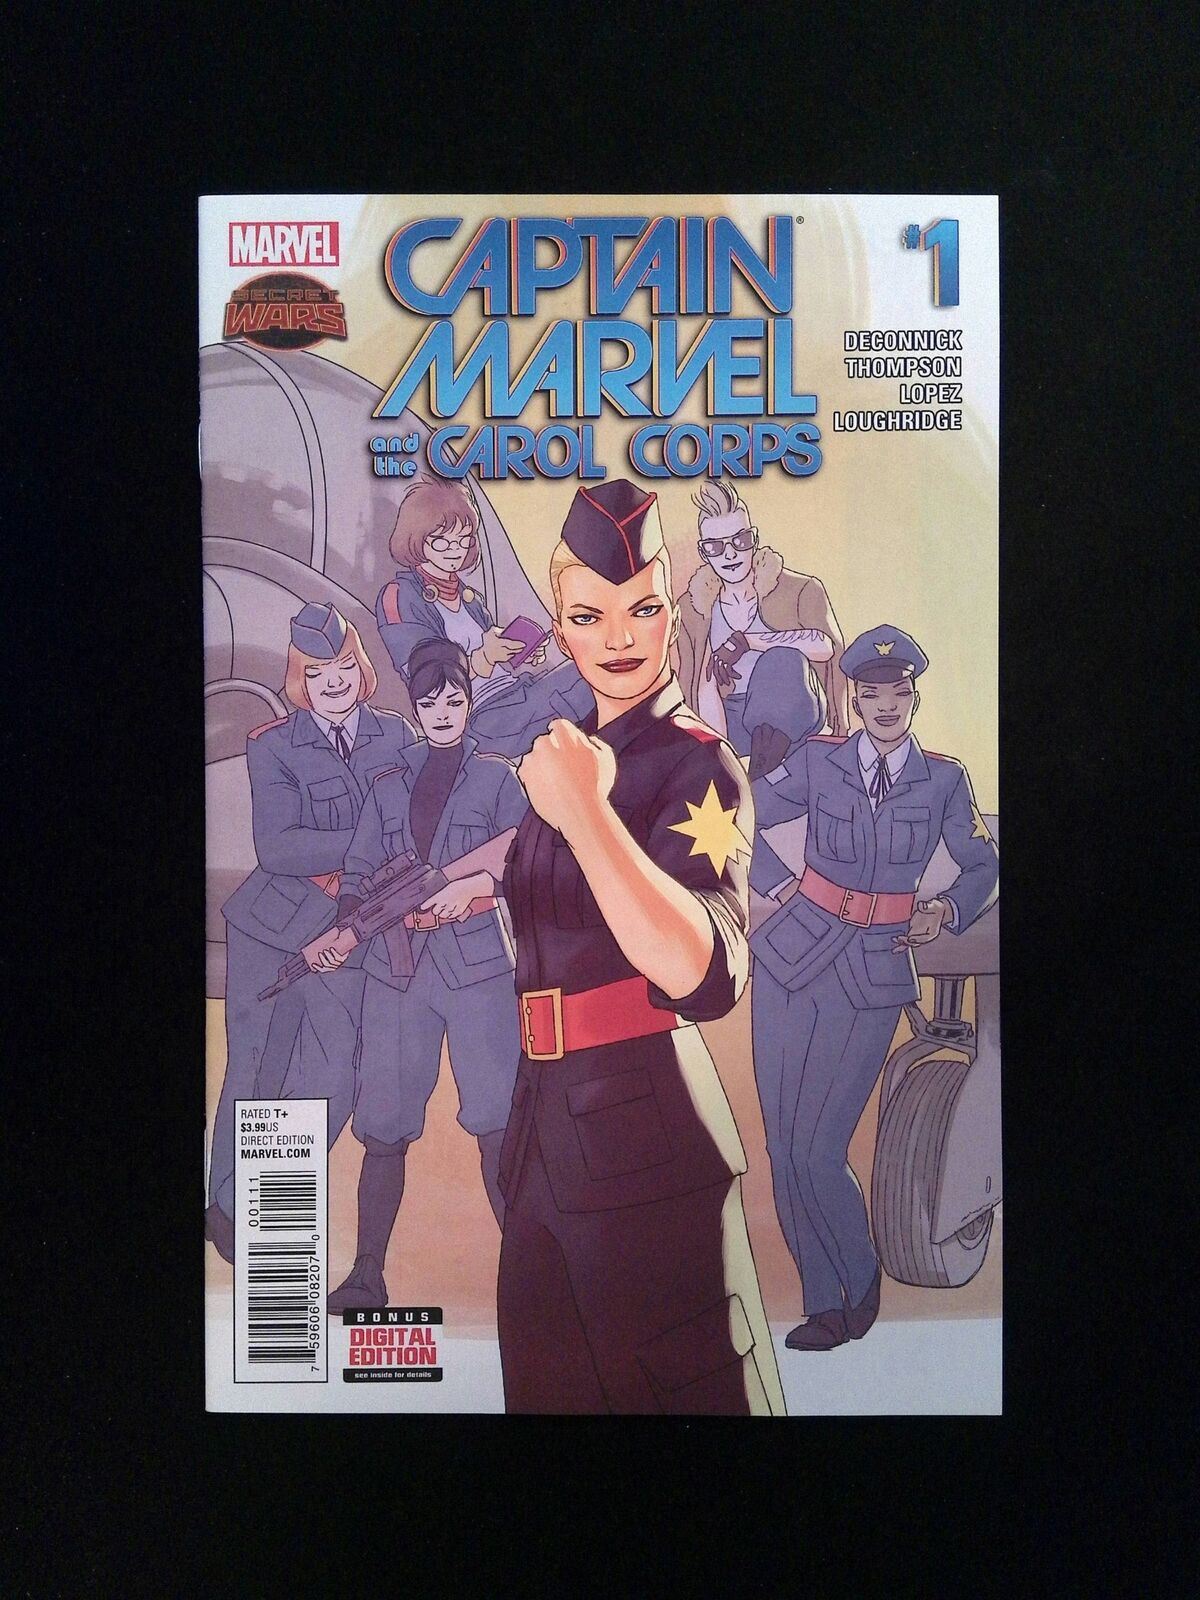 Captain Marvel And The Carol Corps #1  Marvel Comics 2015 NM+